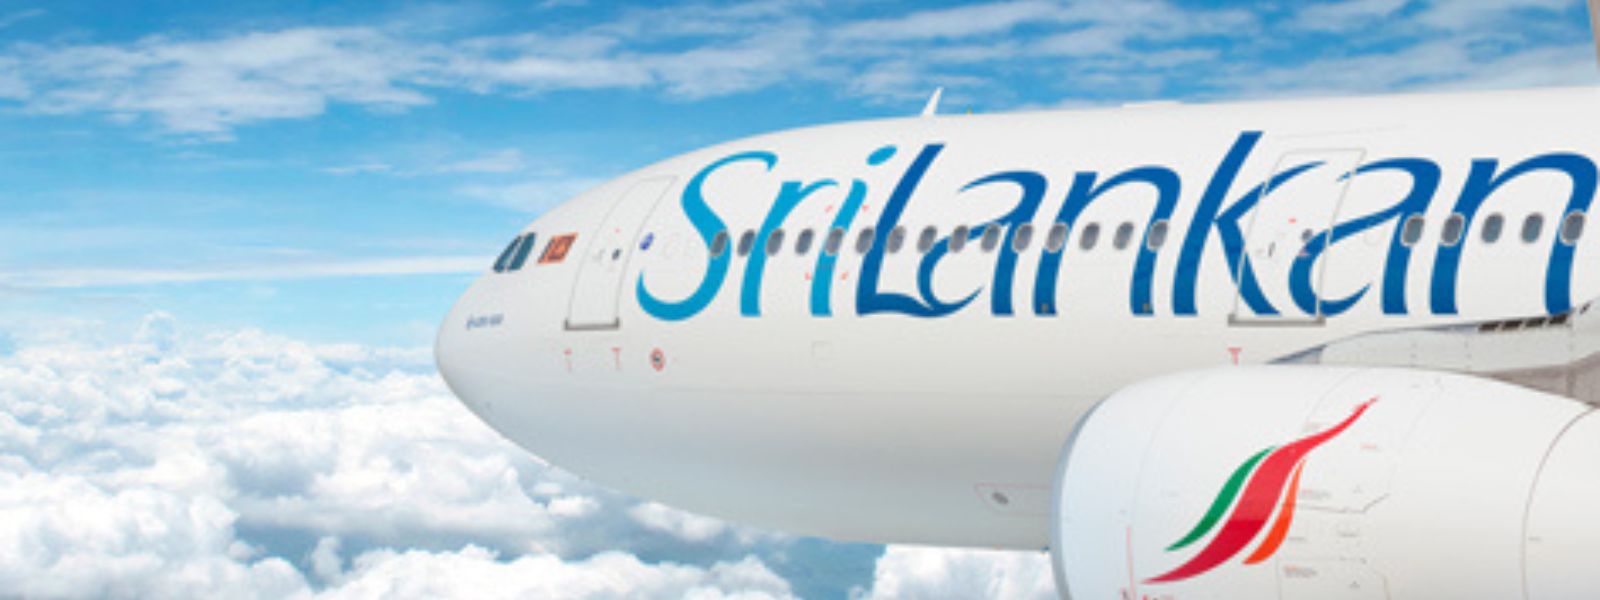 SriLankan Airlines flight UL-181 cancelled